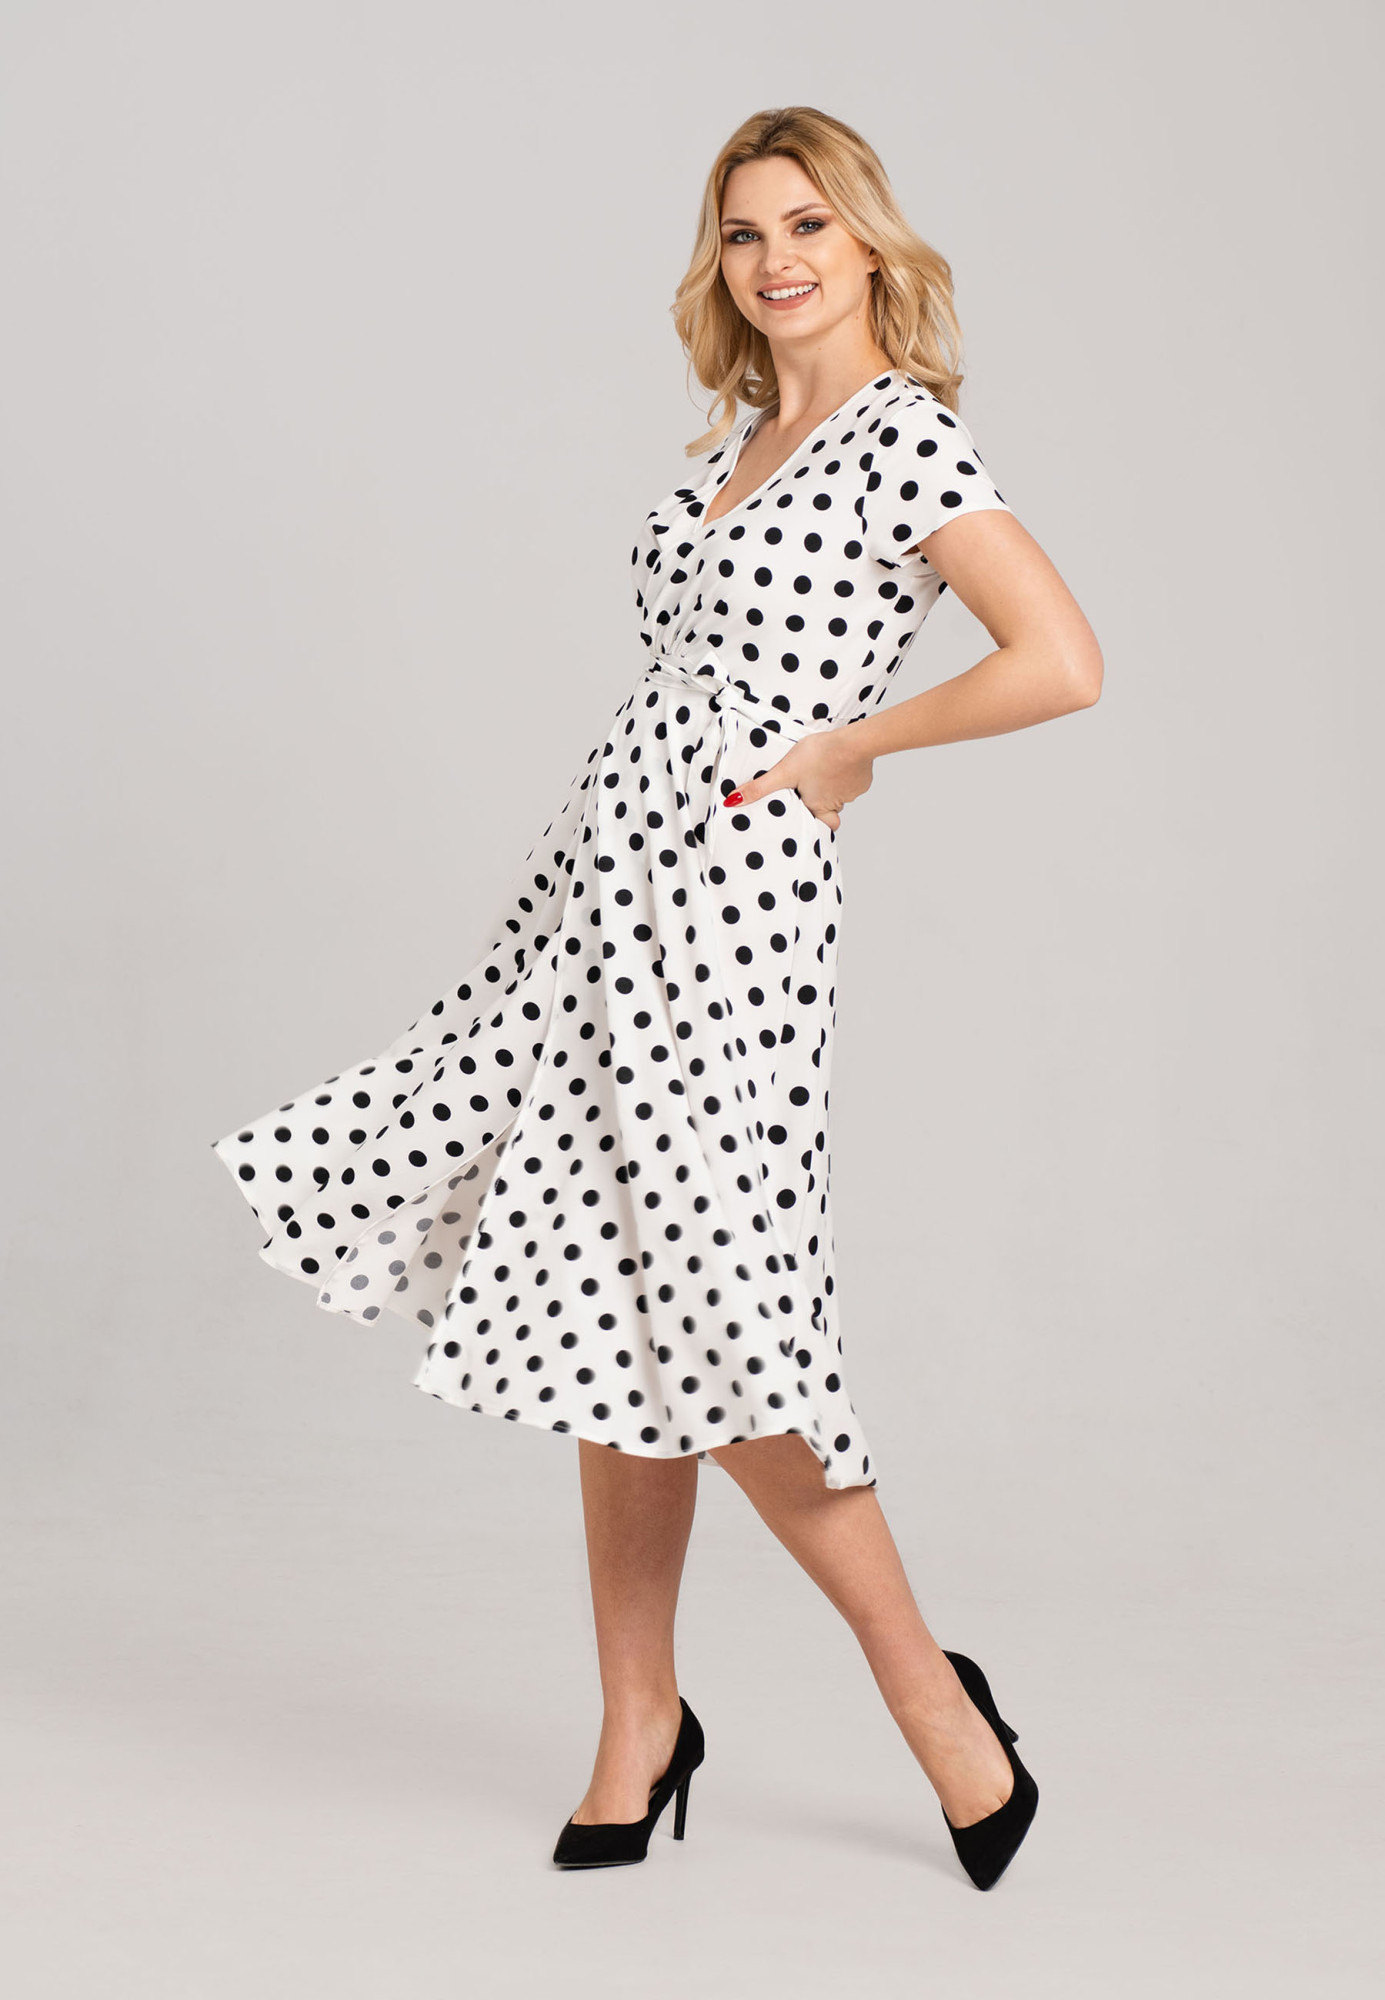 Look Made With Love Šaty N20 Polka Dots Black/White M